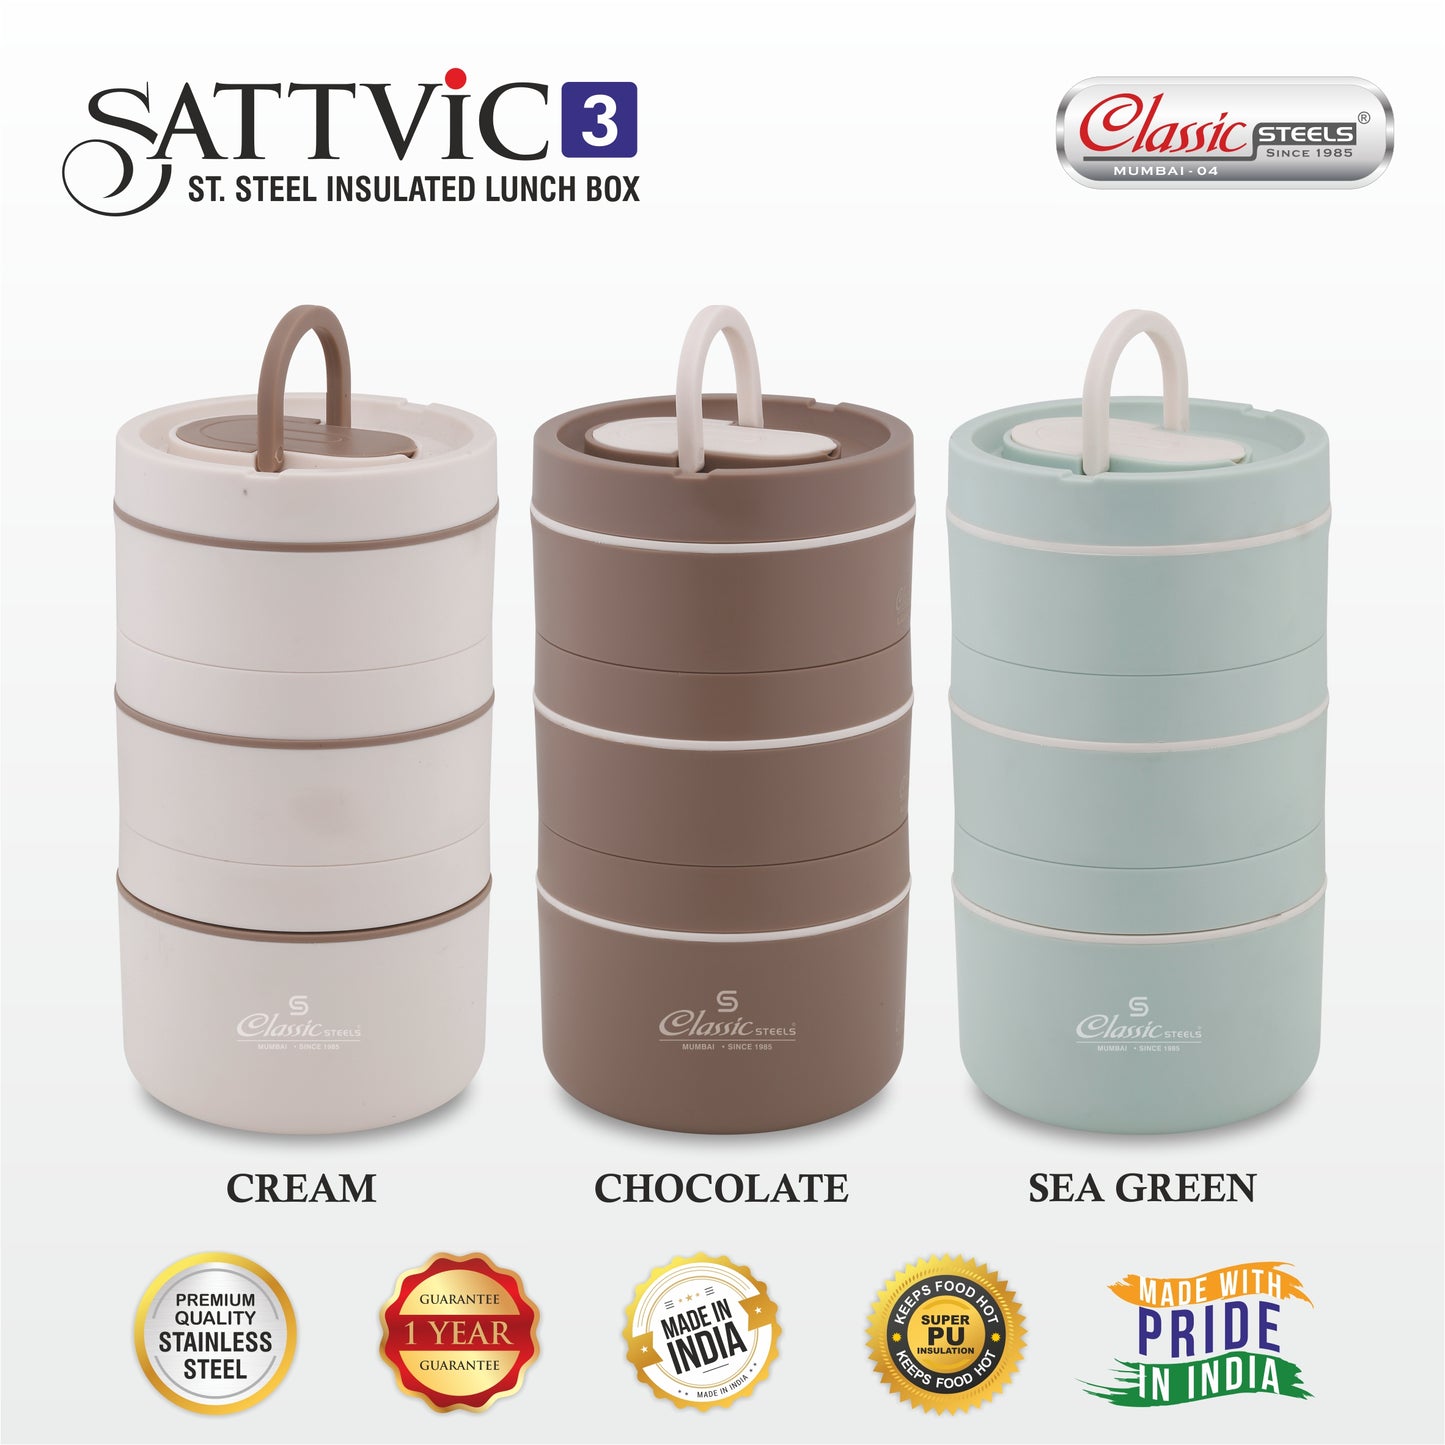 Sattvic 3 pcs Insulated Lunch Box